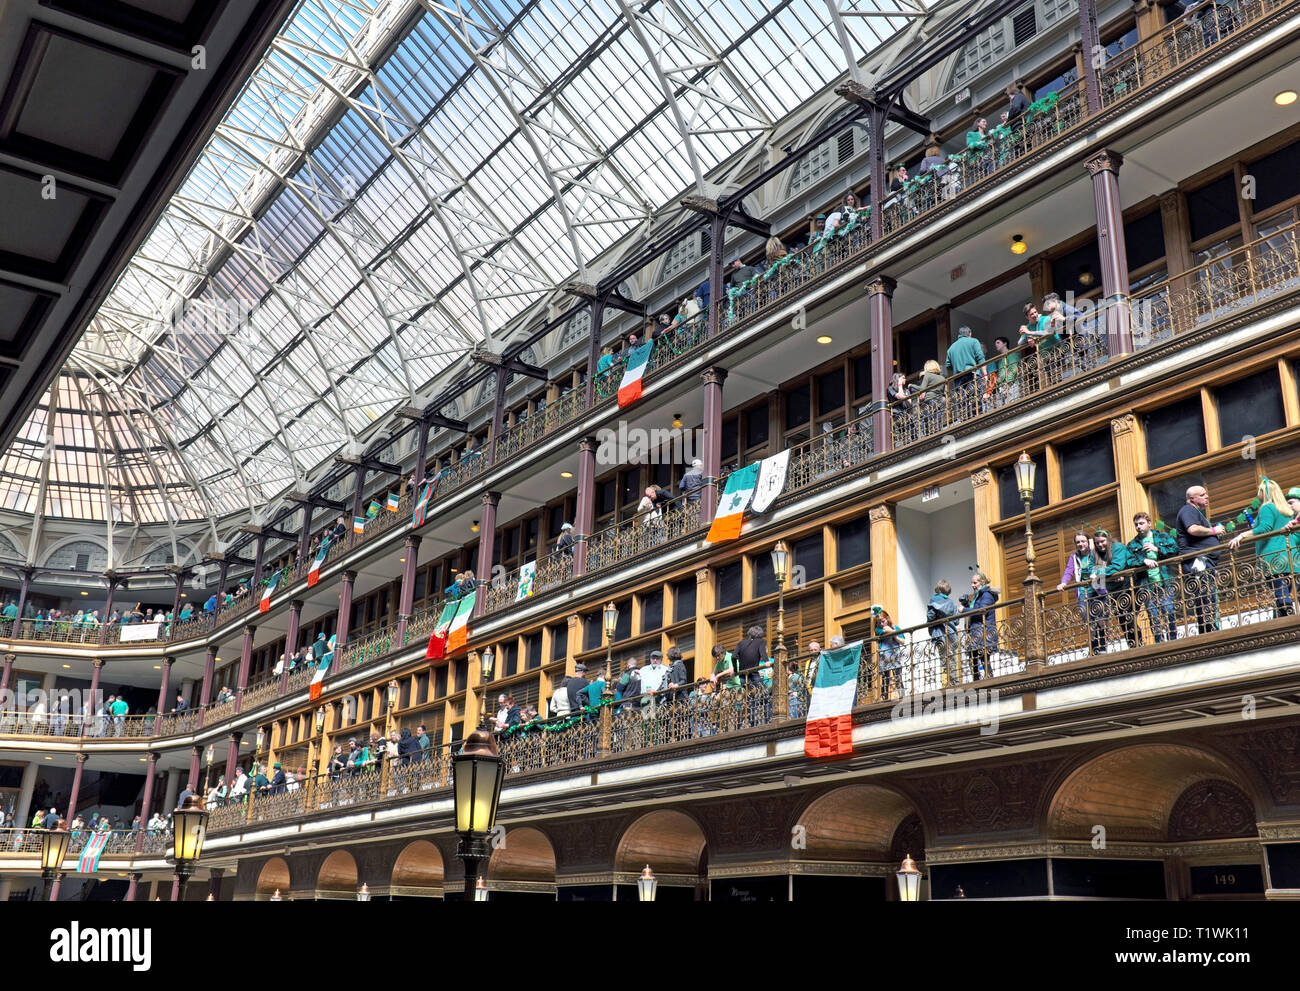 St. Patrick's Day celebrants enjoy the organic indoor 'street' party in the Arcade, a historic indoor mall with hotel in downtown Cleveland, Ohio, USA. Stock Photo